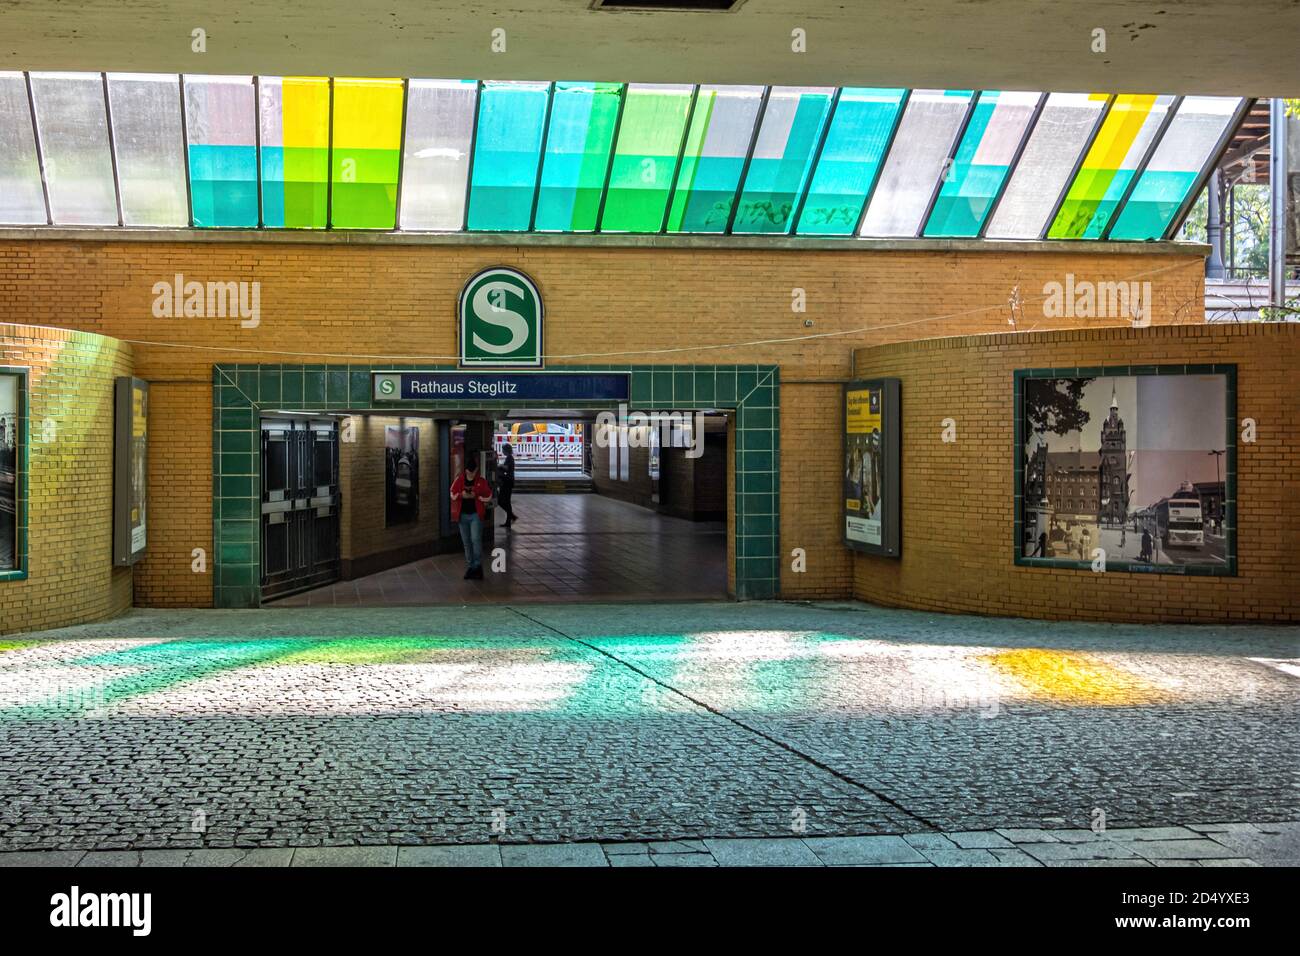 Rathaus Steglitz S-bahn station entrance on the S1 line that runs between Wannsee & Oranienberg. Part of the Commuter network In Steglitz,Berlin, Stock Photo